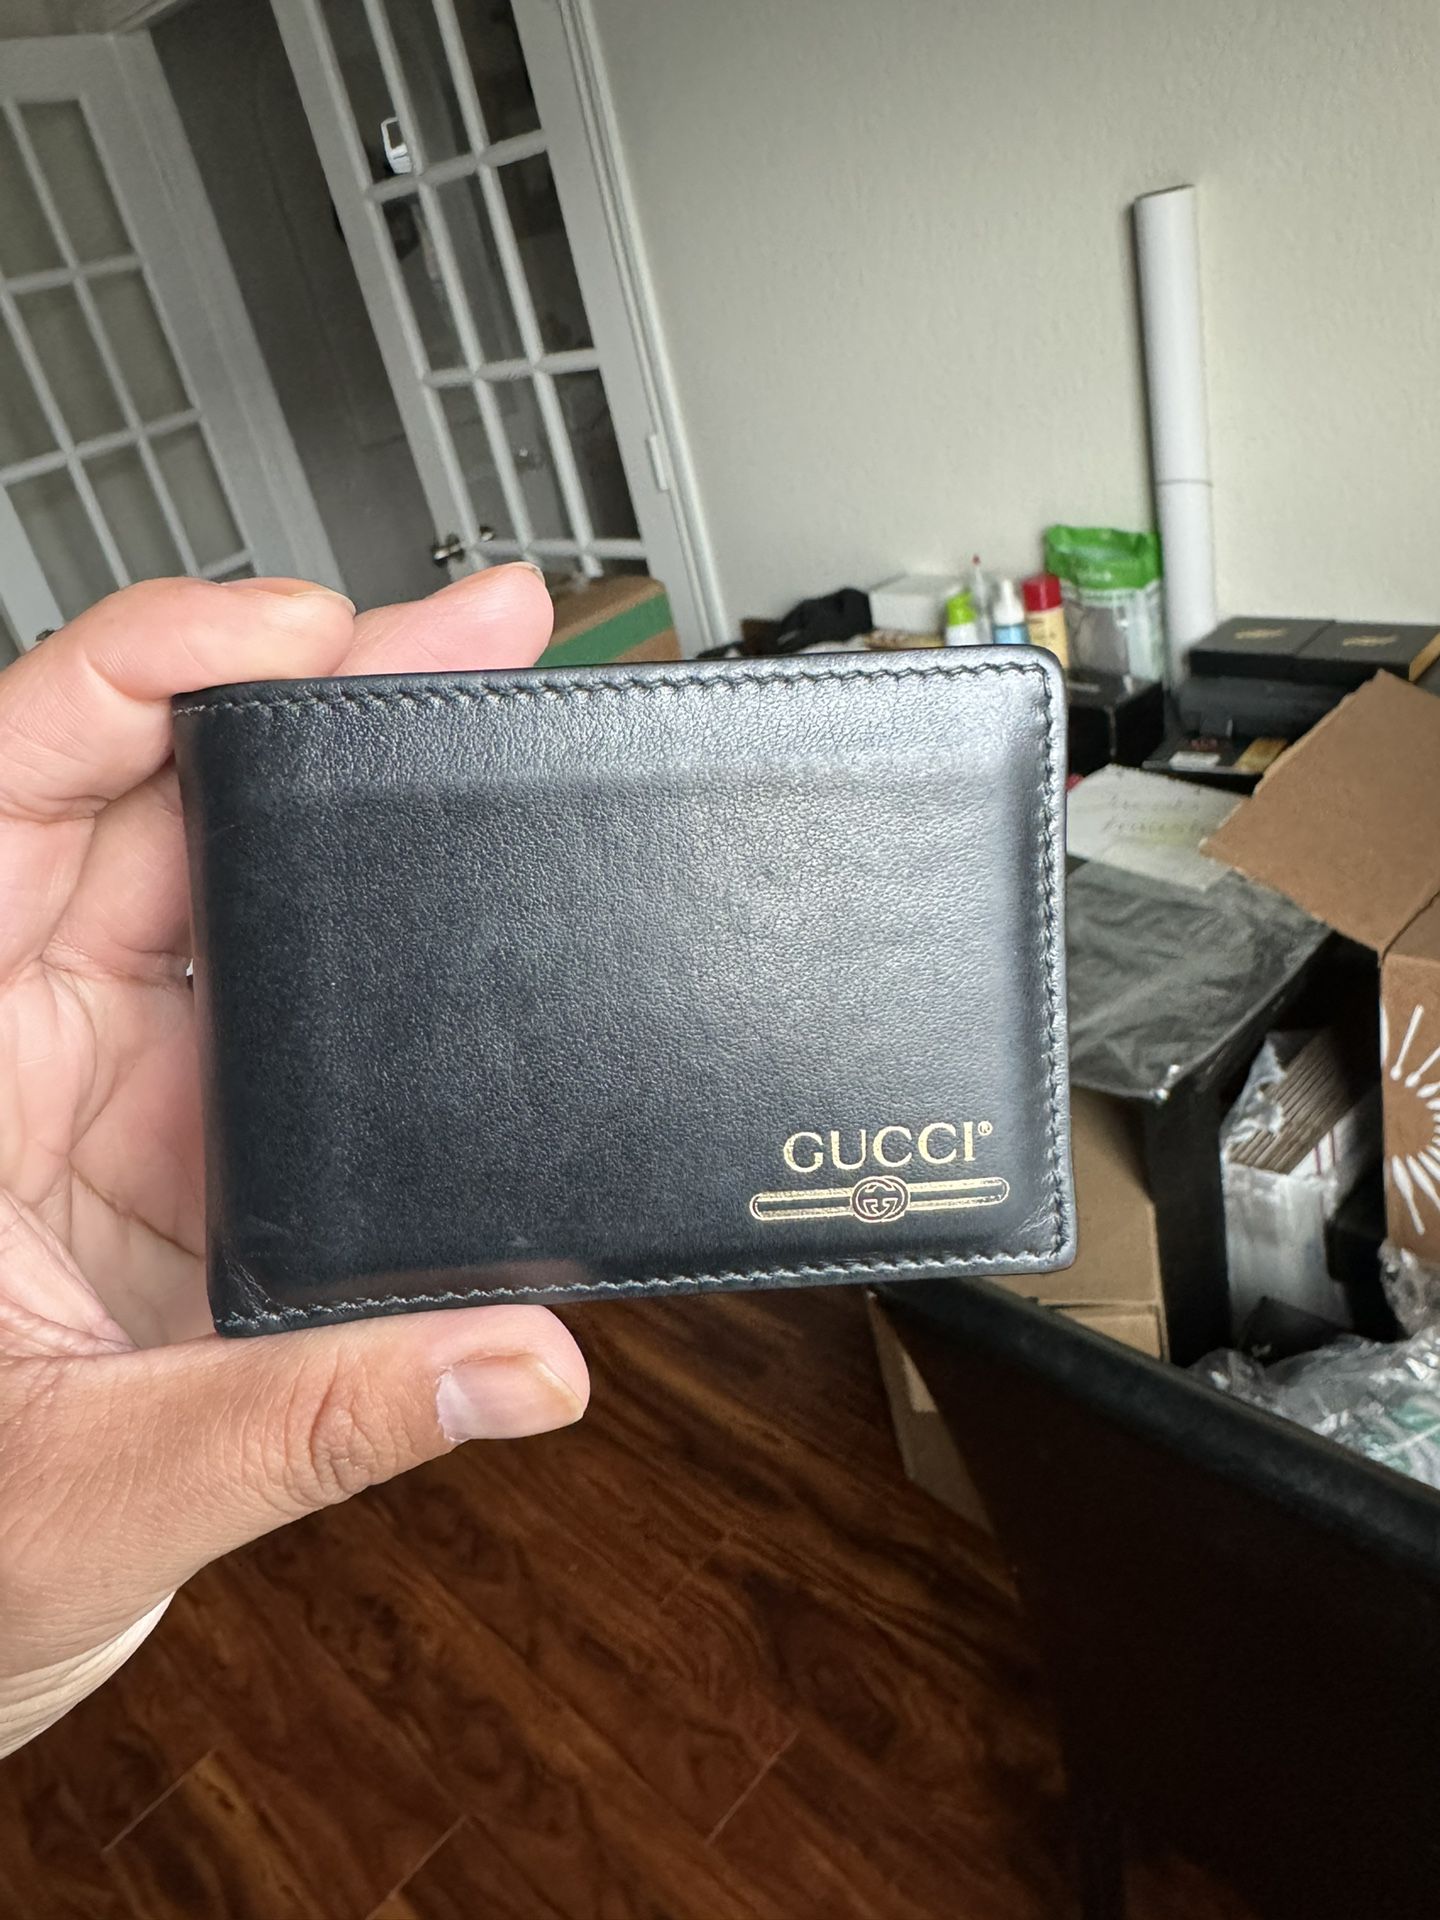 Preowned Gucci Bifold Wallet for Sale in San Antonio, TX - OfferUp